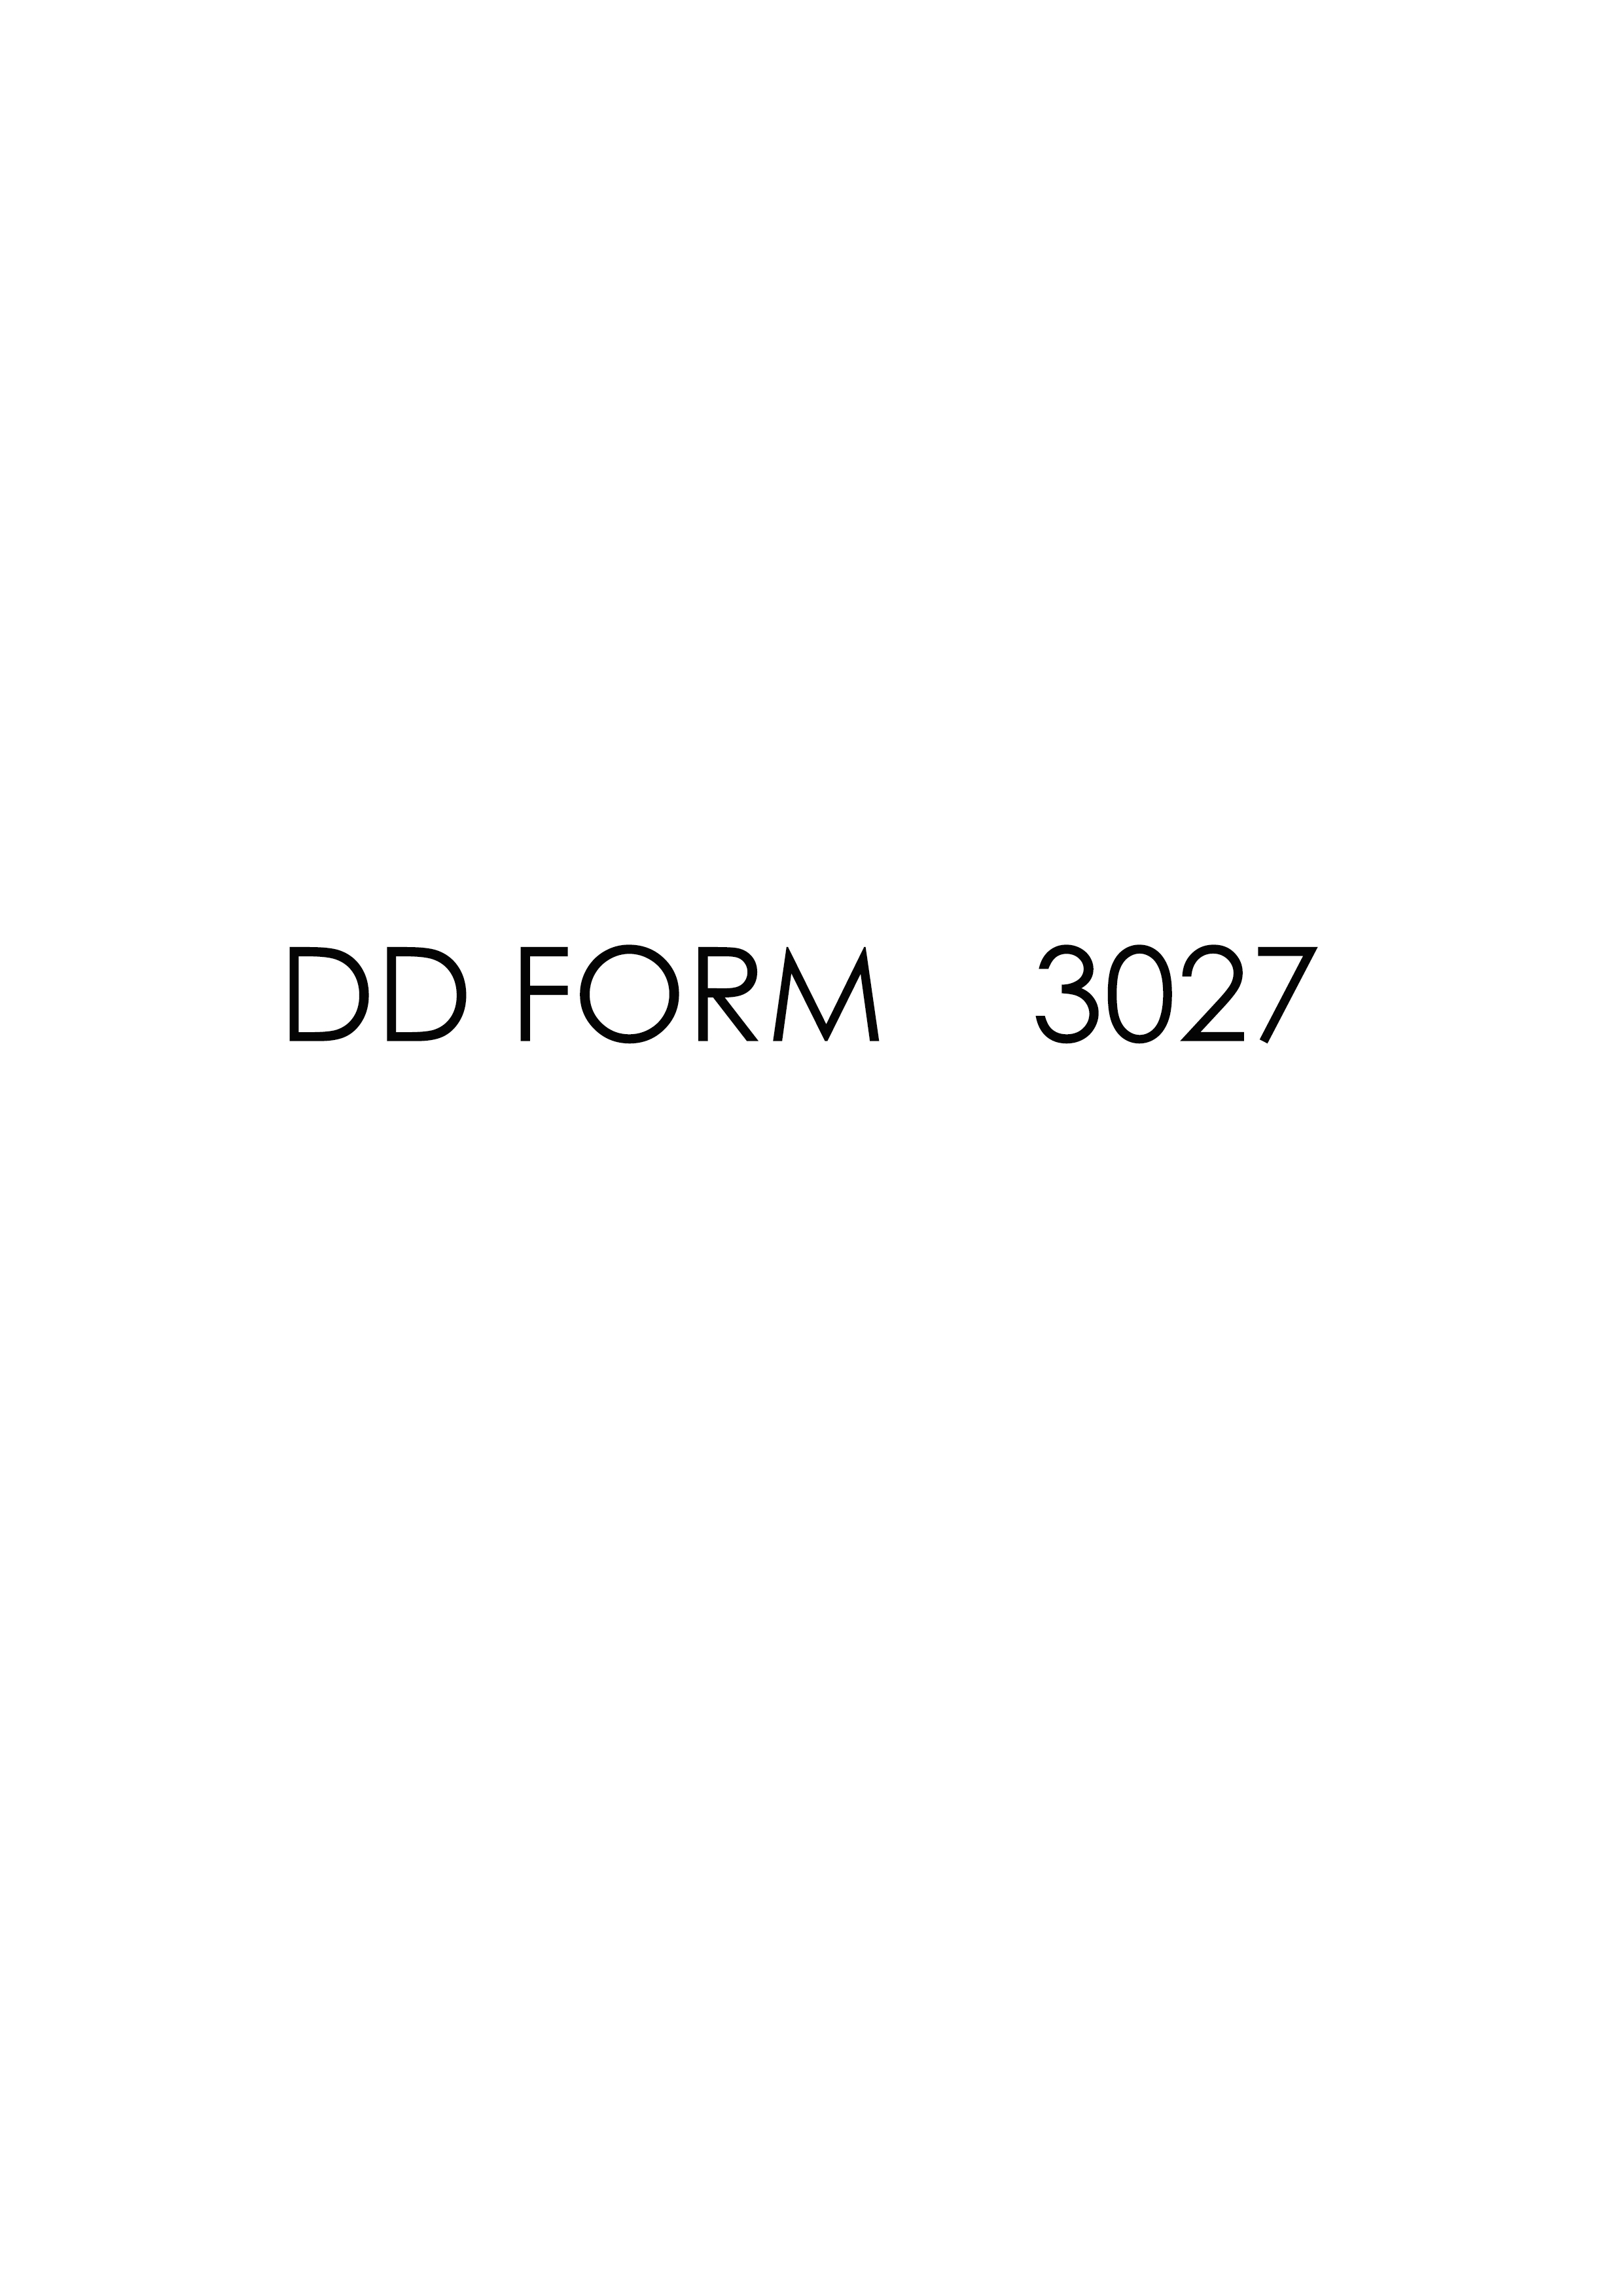 Download Fillable dd Form 3027